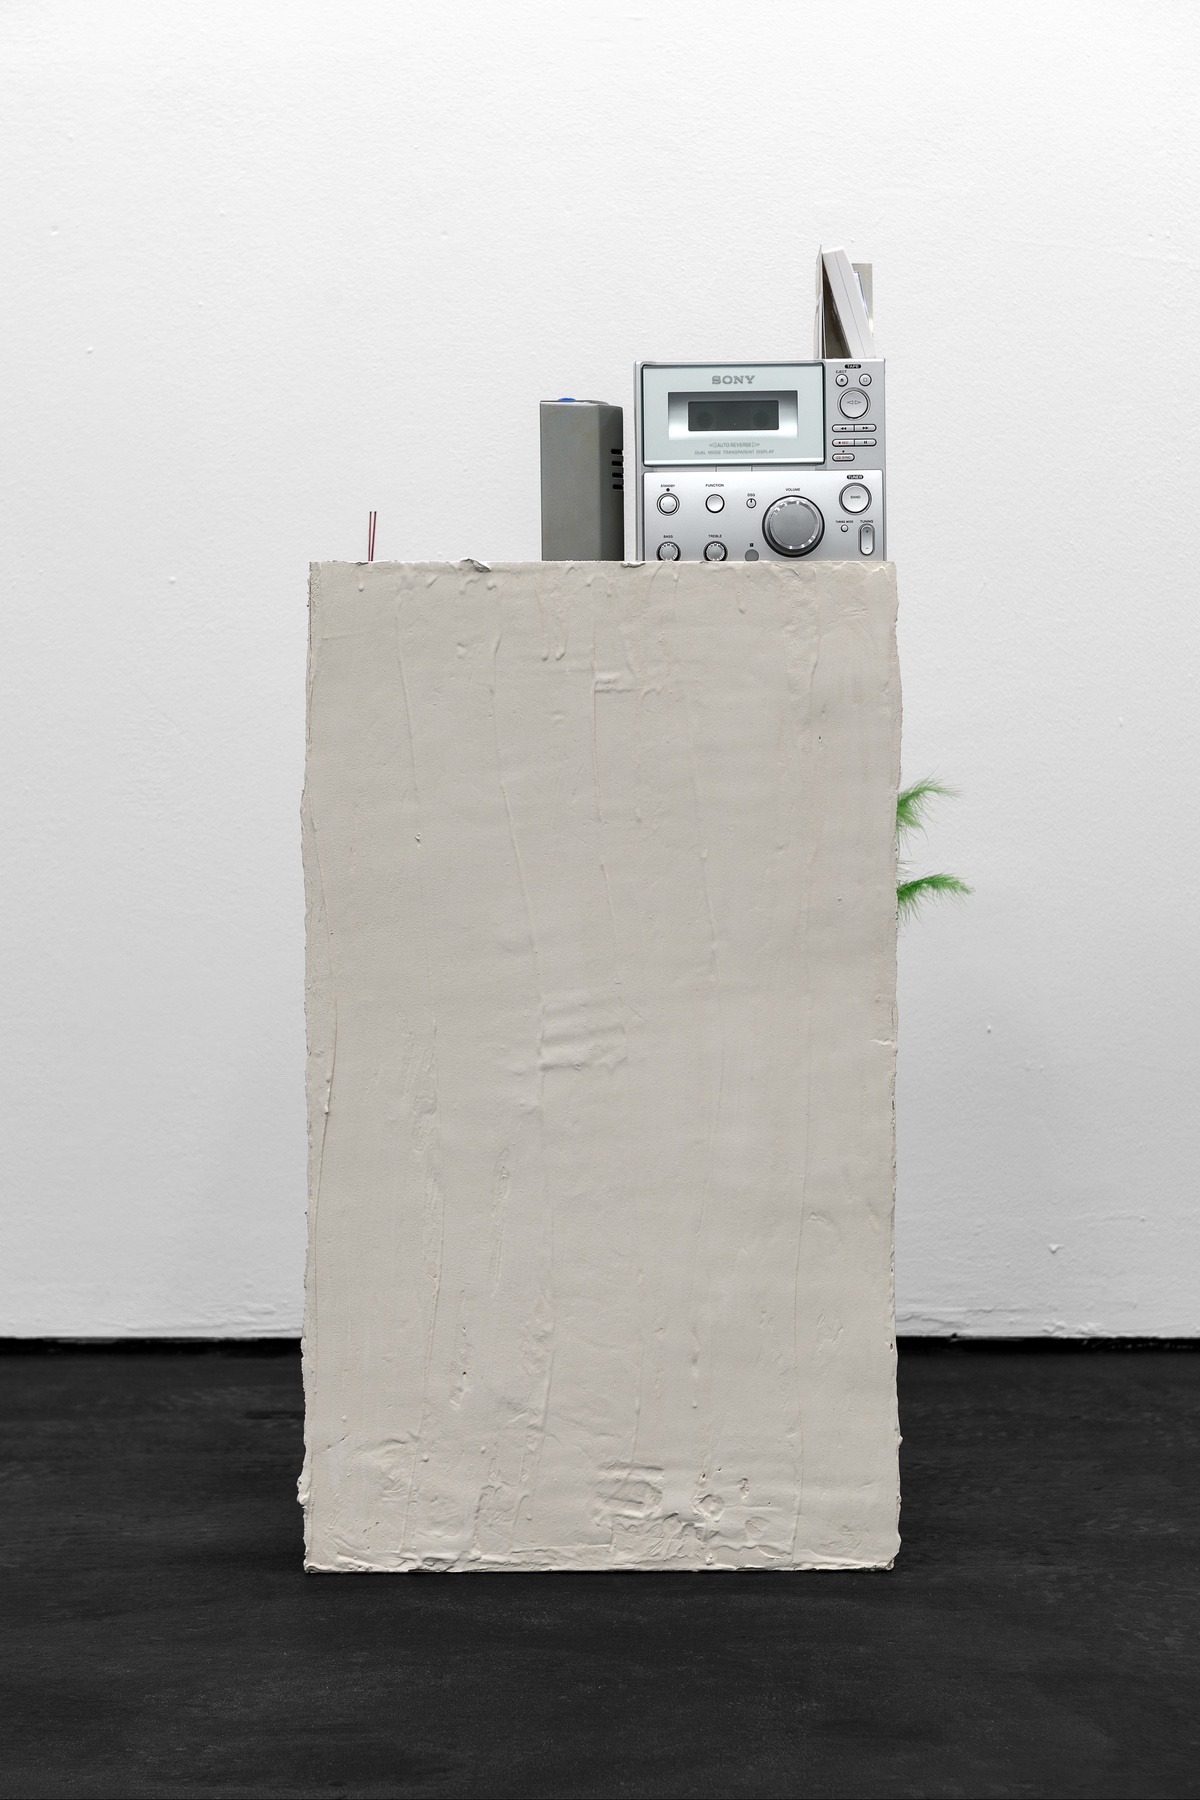 Phung-Tien Phan, City girl, 2022multiplex, putty, acrylic paint, pot, synthetic feathers, scotch tape, bread cutter, stereo system, instax photographs, aluminum plate, incense sticks, LED lamp99 × 42 × 42 cm